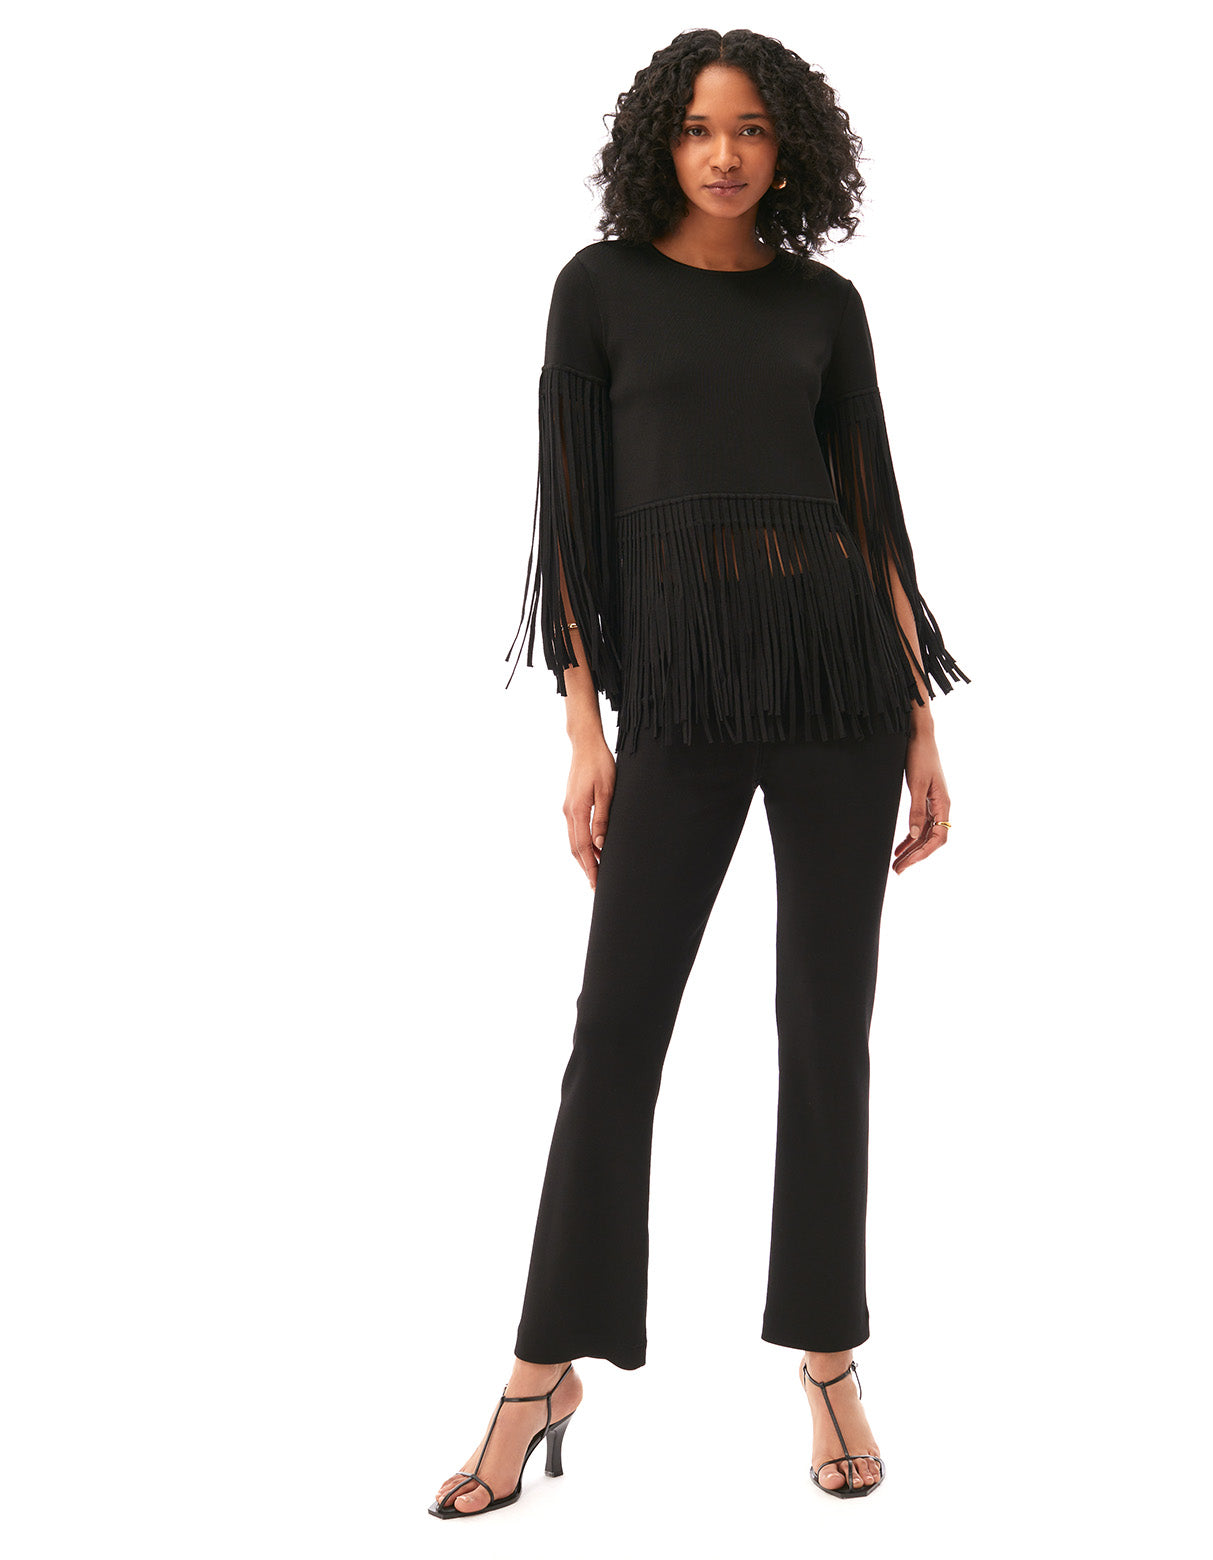 catalina fringe tee knit designer fashion top jet black - flattering office to date night tops for women